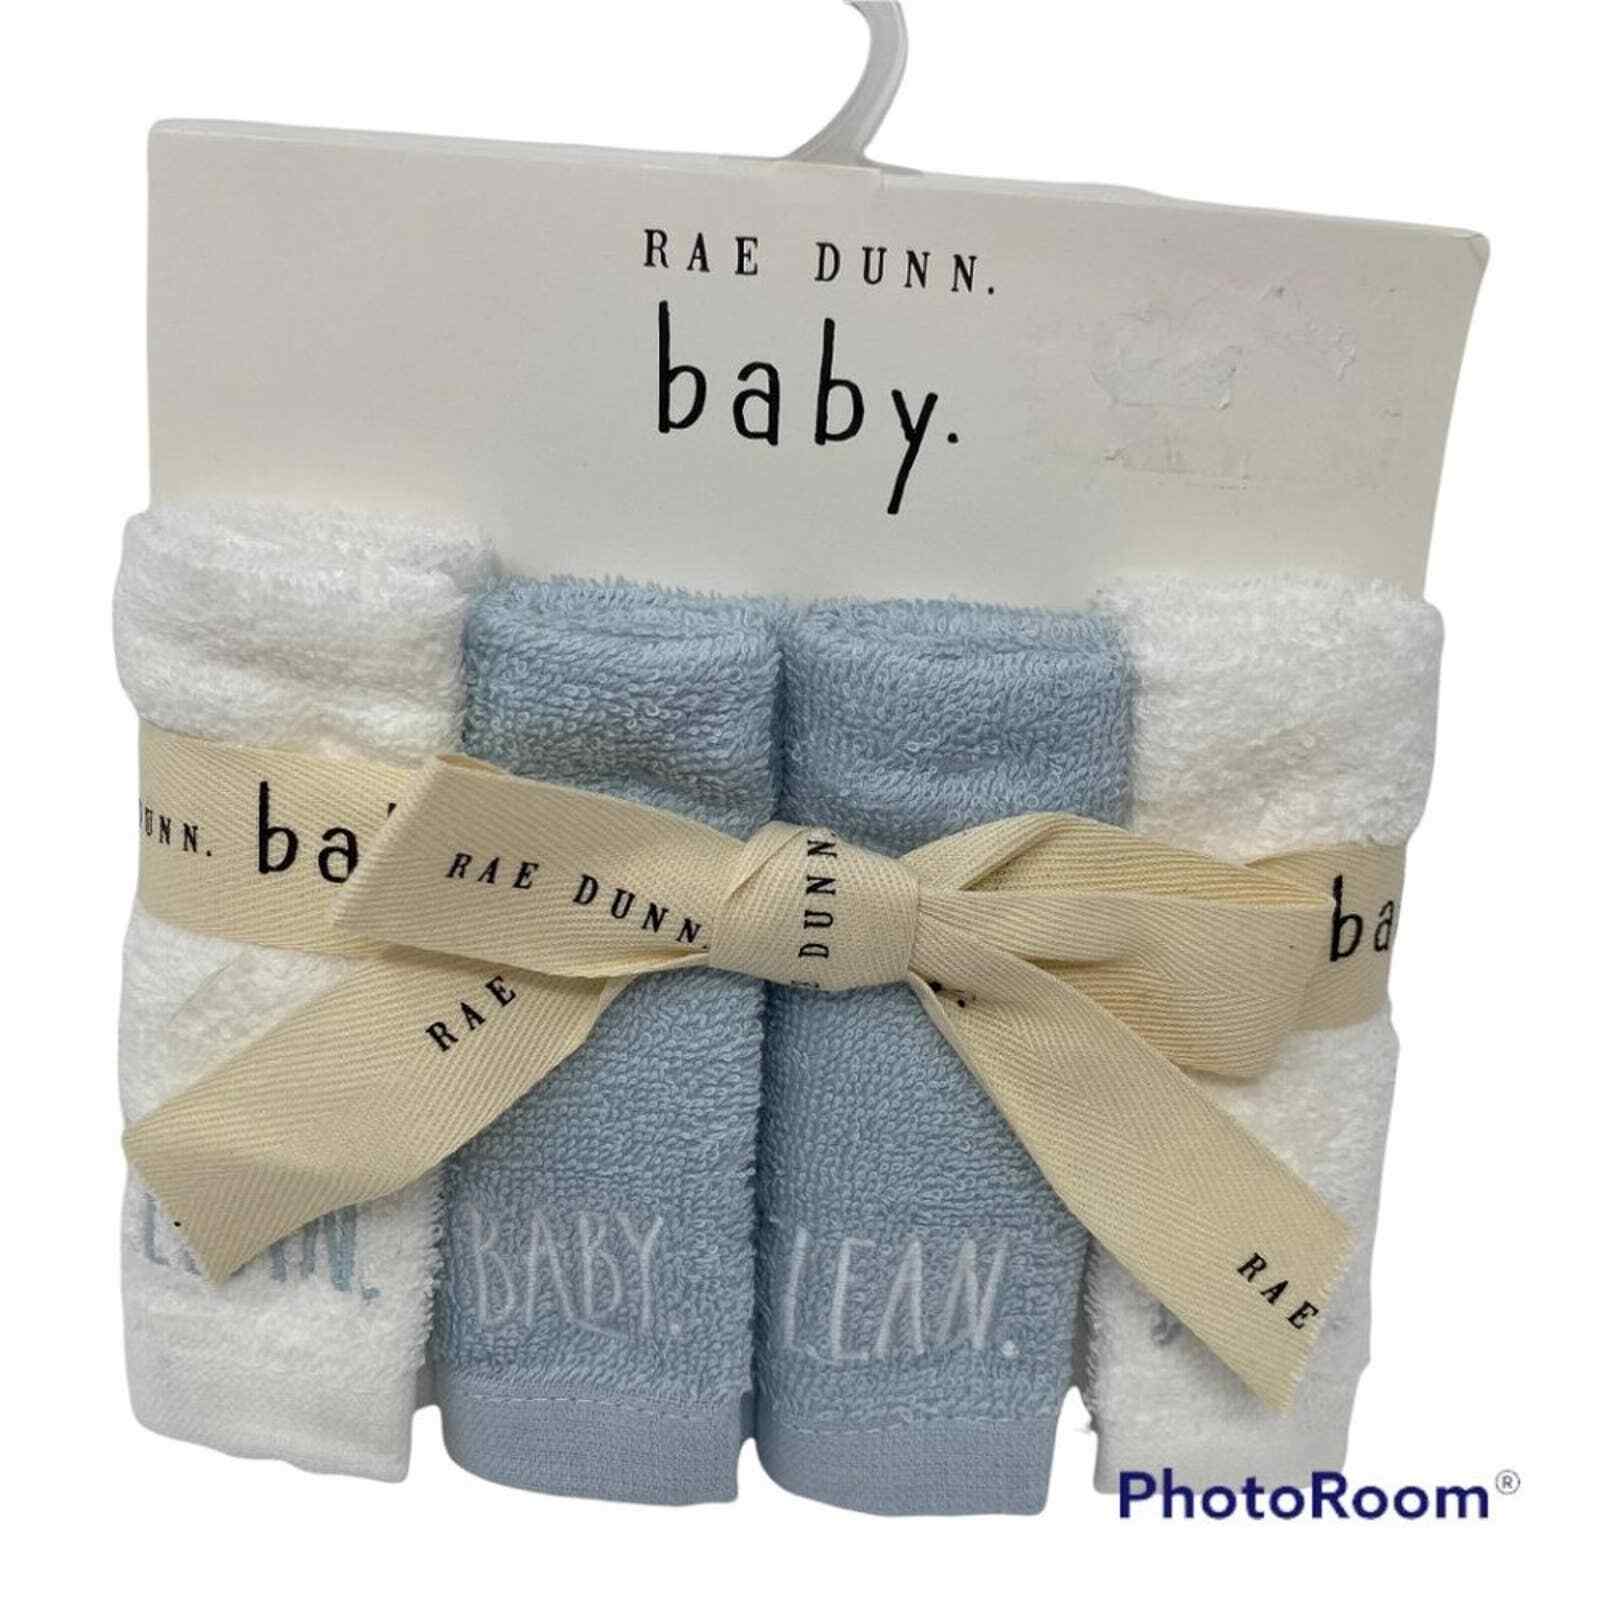 Rae Dunn Baby Baby Blue And White Embroidered Cotton Wash Cloths Set Of 4